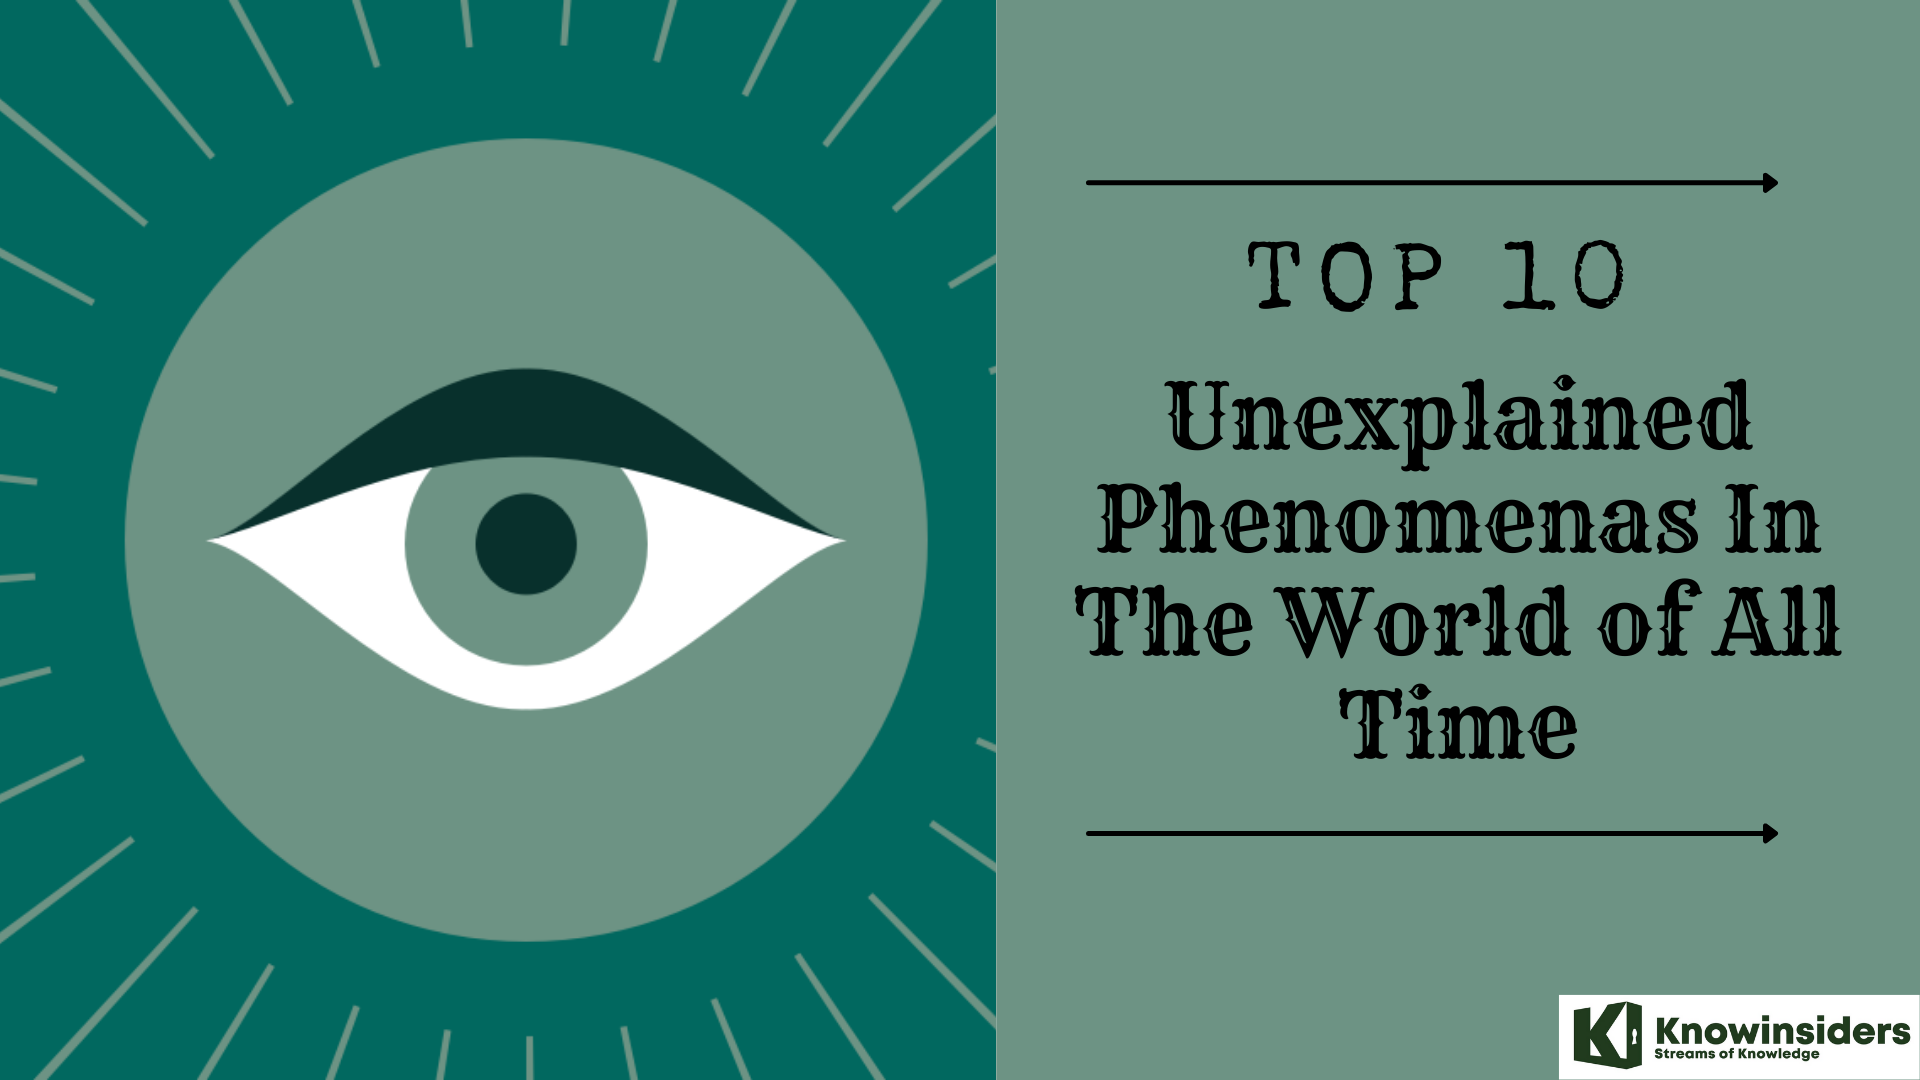 Top 10 unexplained phenomenas in the world of all time 